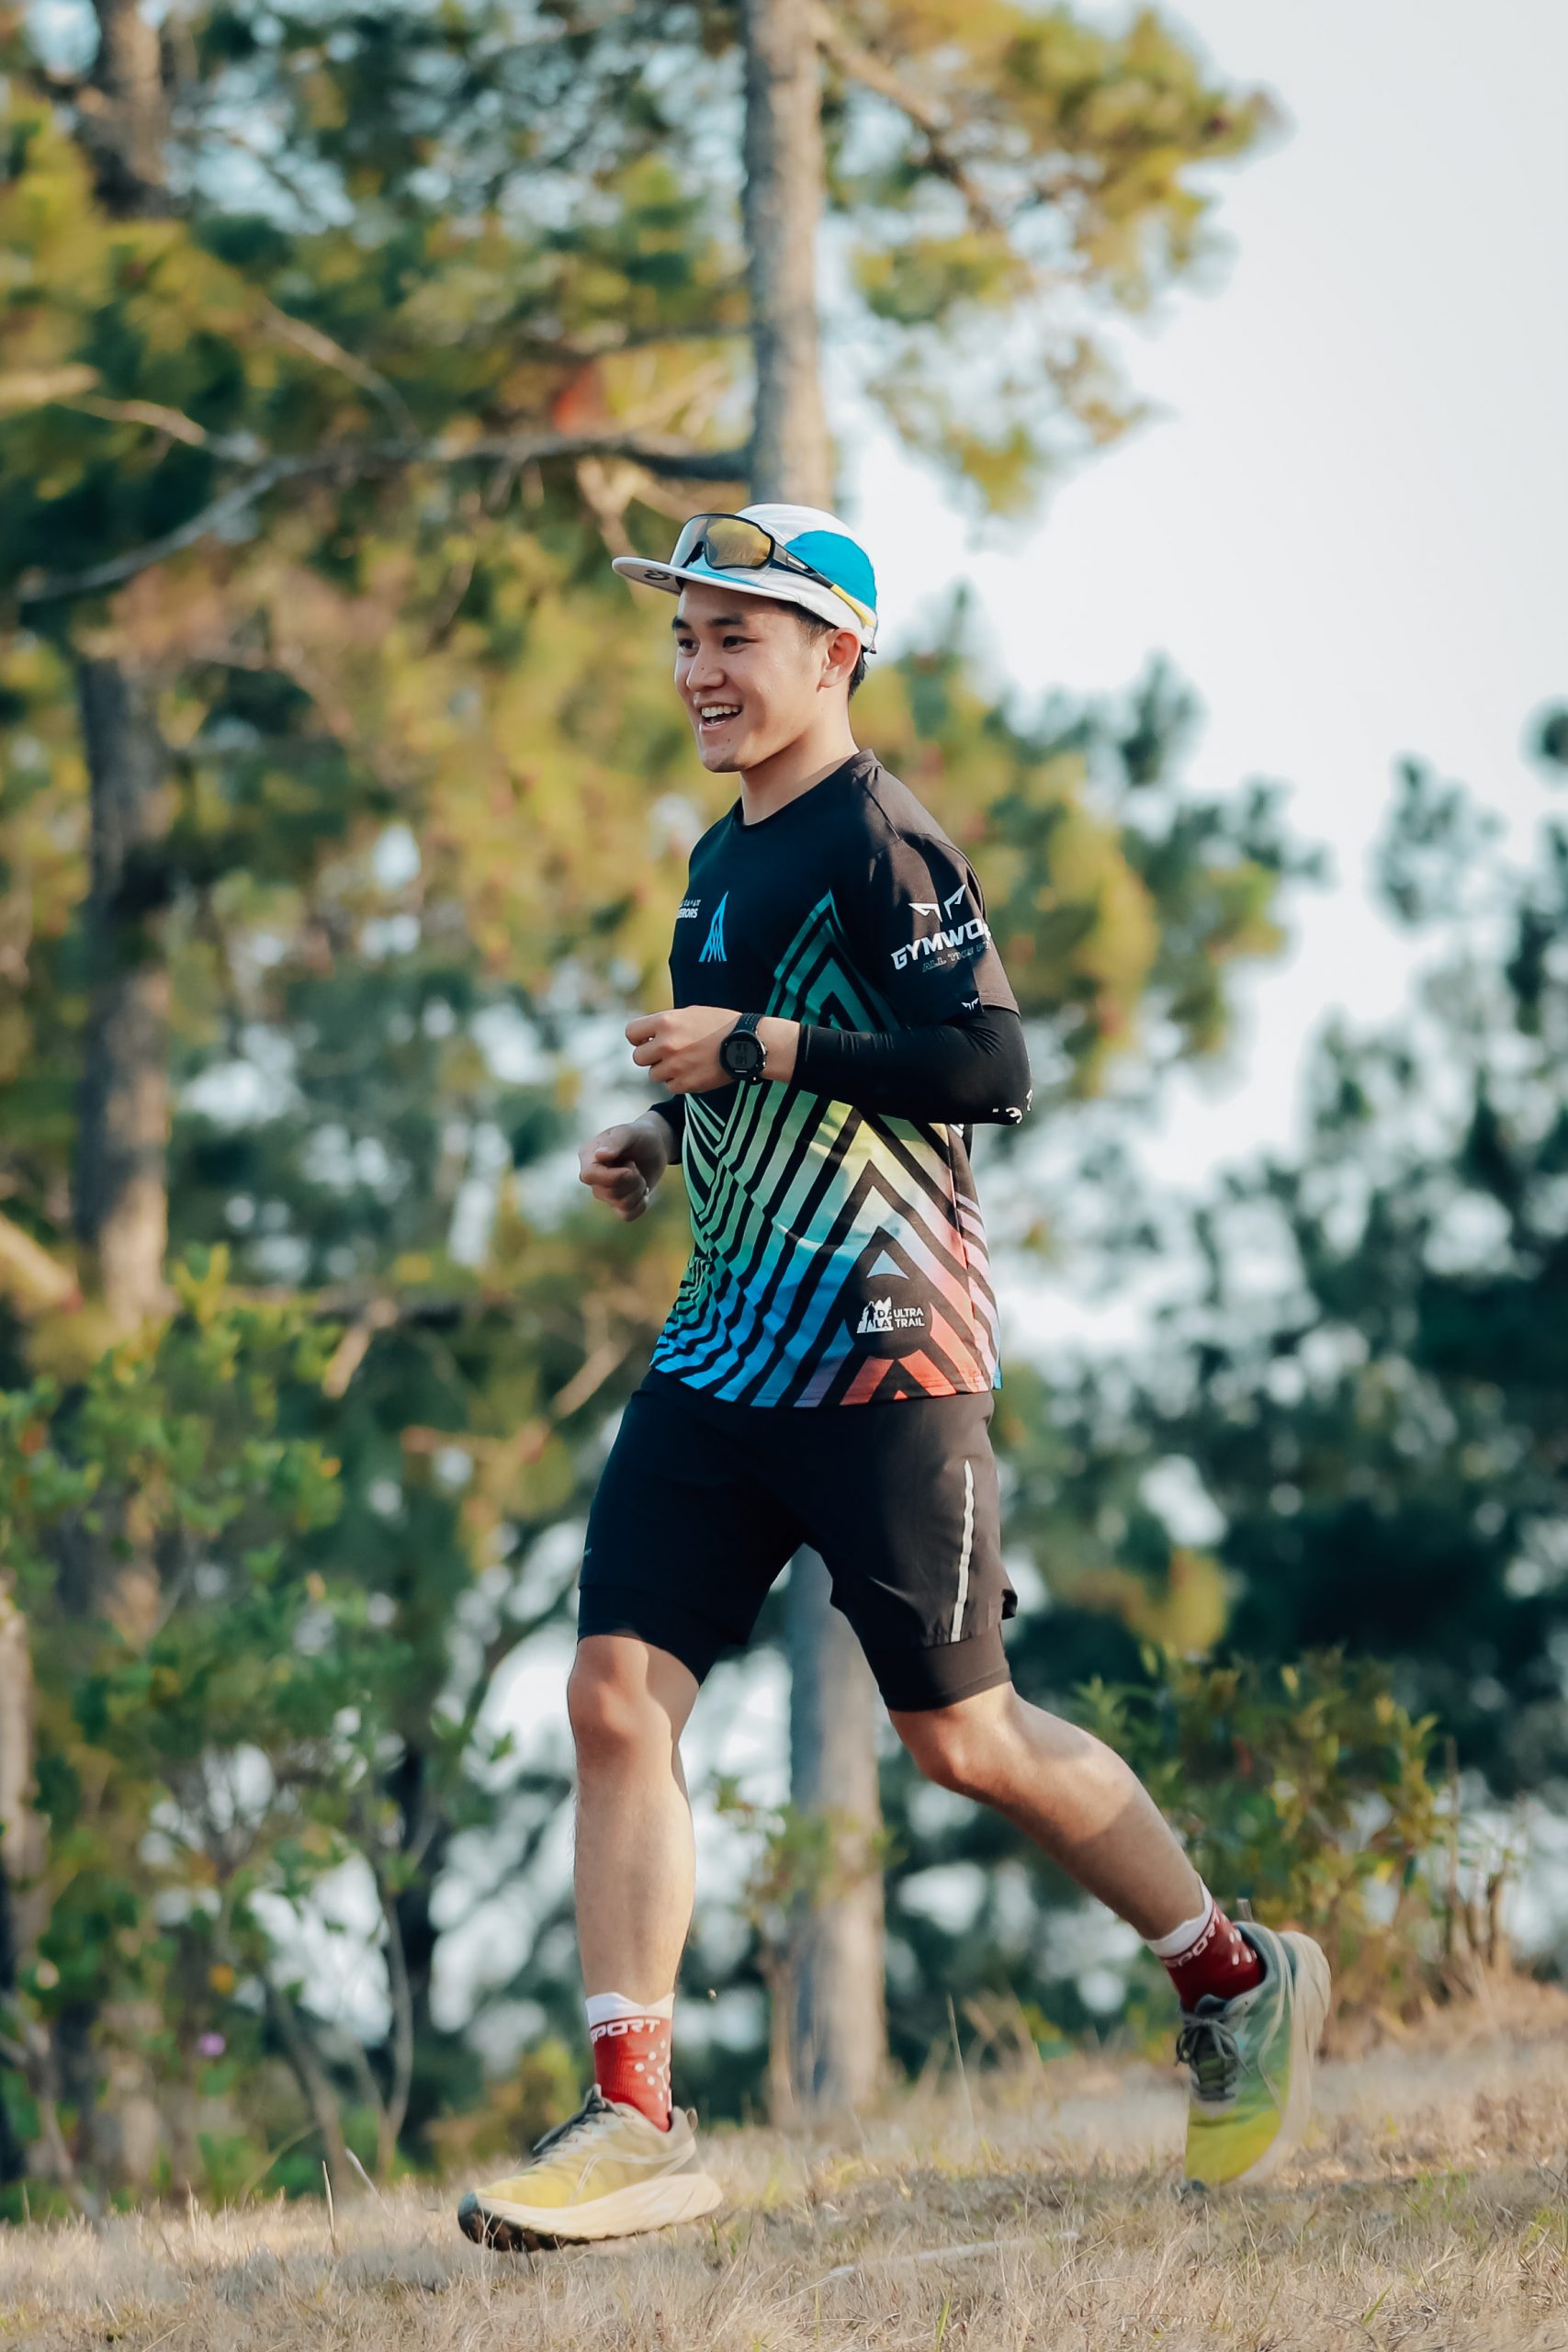 Thế Anh and his passion for running.